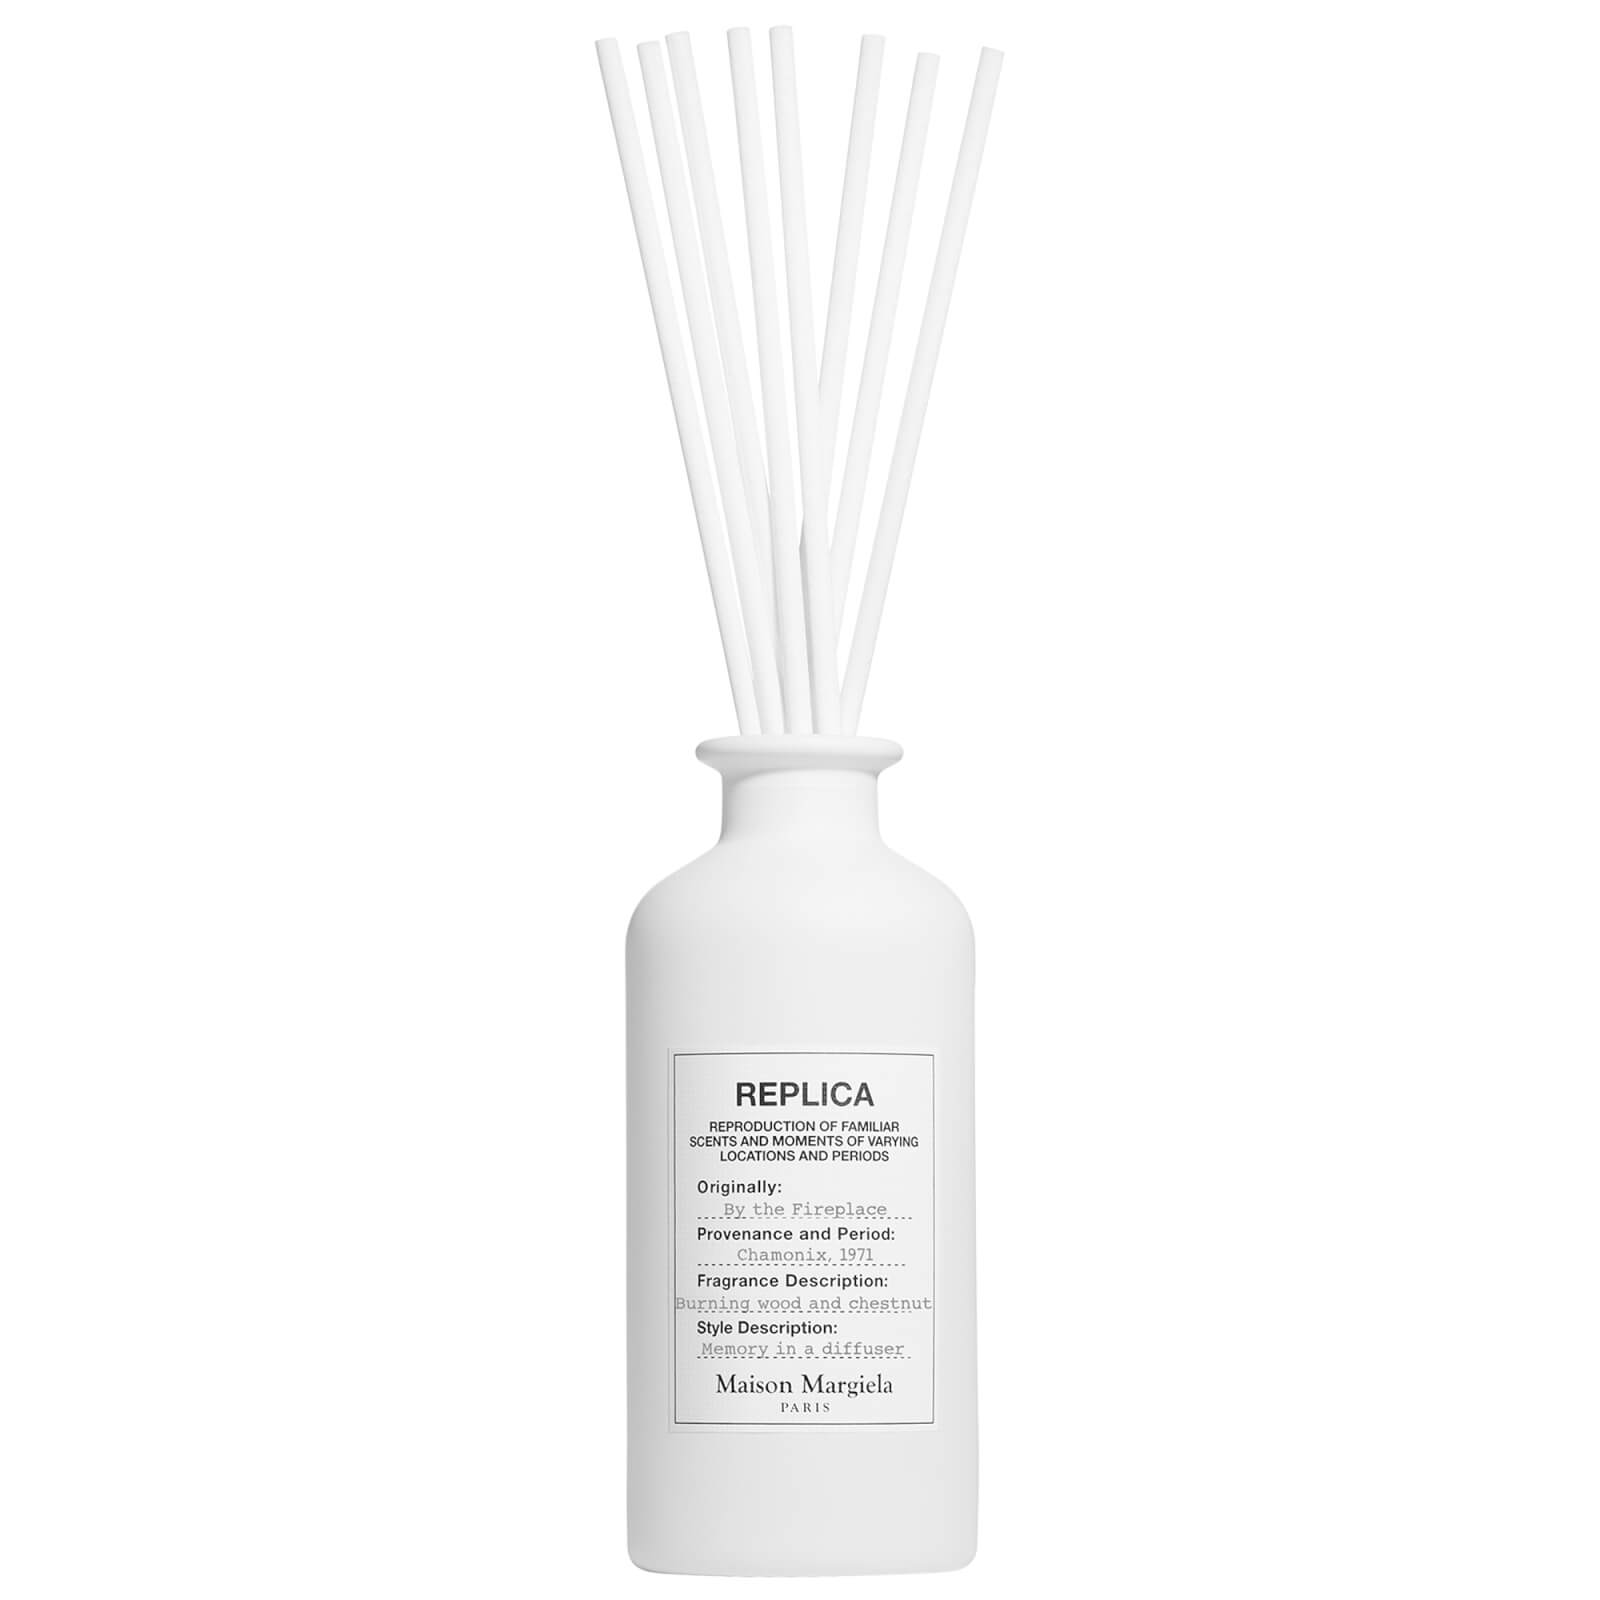 Image of Maison Margiela Replica By The Fireplace Diffuser 170ml